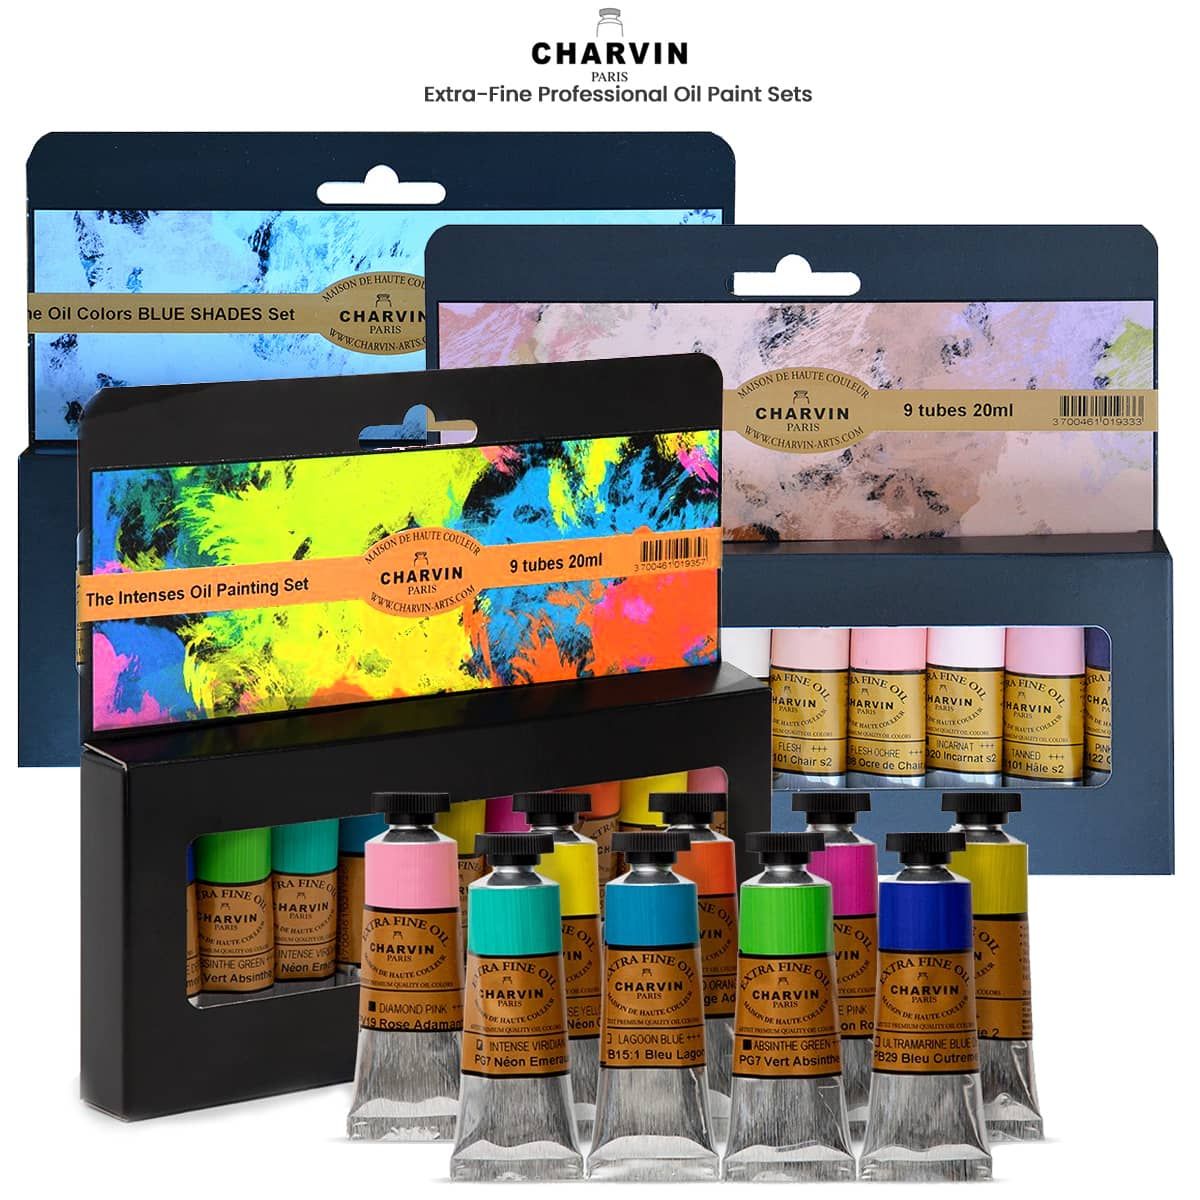 Charvin Professional Oil Paint Extra Fine Color, Salutation Set of 8 60ml  Tubes - Assorted Colors